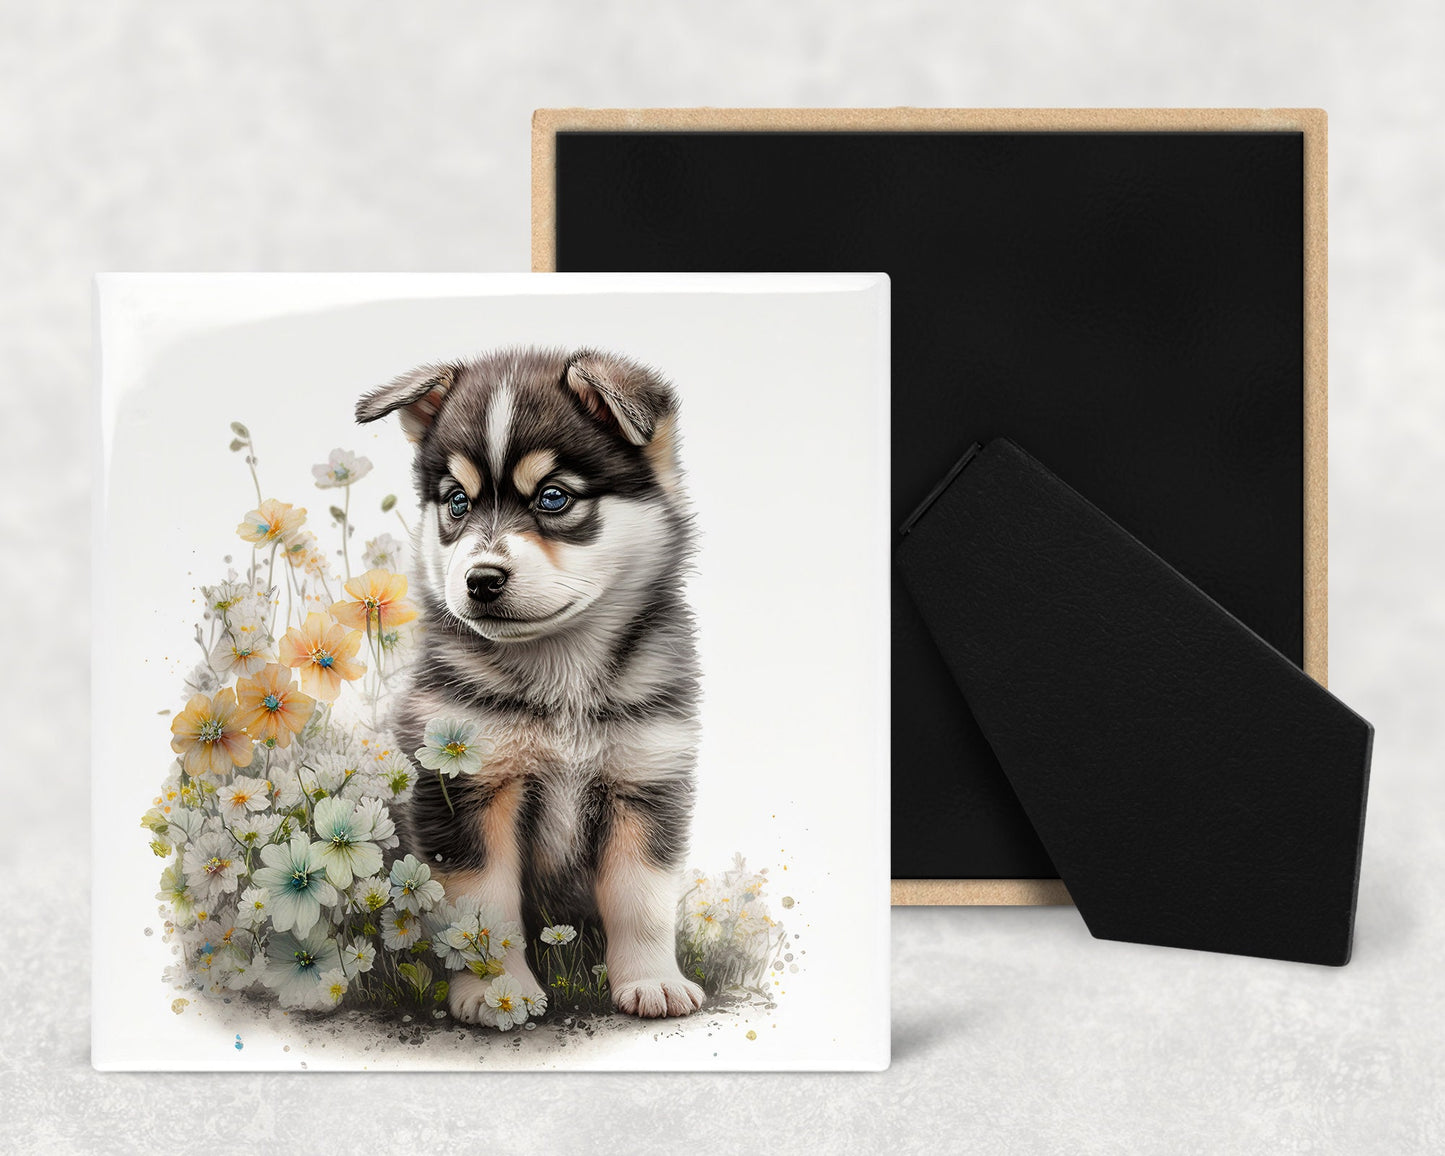 Cute Malamute Puppy Art Decorative Ceramic Tile Set with Optional Easel Back - Available in 4 sizes - Set of 4